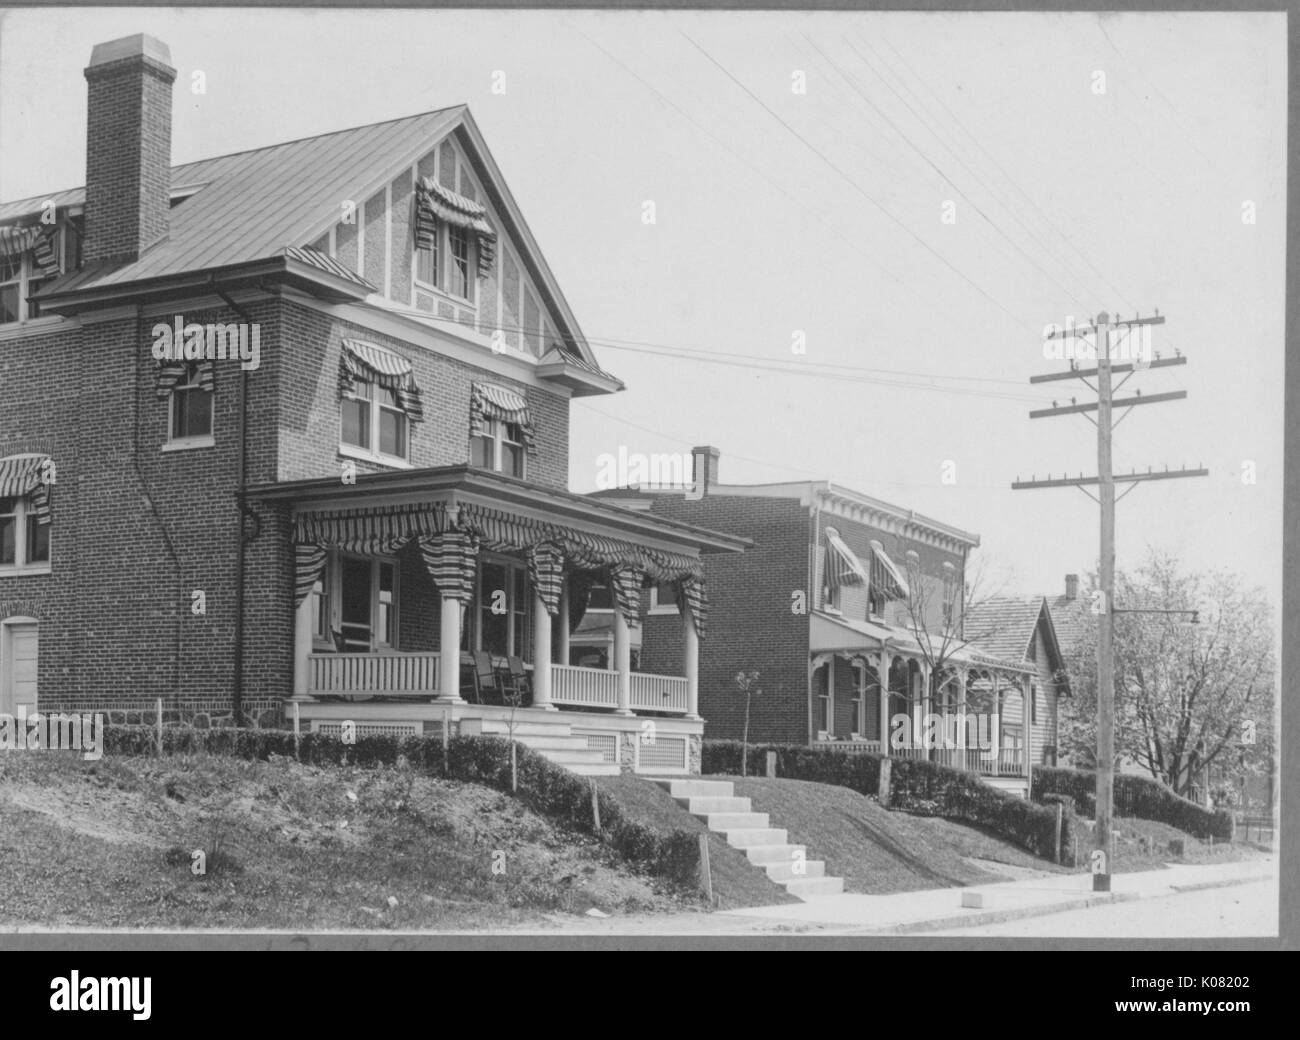 Photograph of a street in Baltimore with Roland Park homes, risen above the street, both brick homes with large front porches in between low hedges, United States, 1920. This image is from a series documenting the construction and sale of homes in the Roland Park/Guilford neighborhood of Baltimore, a streetcar suburb and one of the first planned communities in the United States. Stock Photo